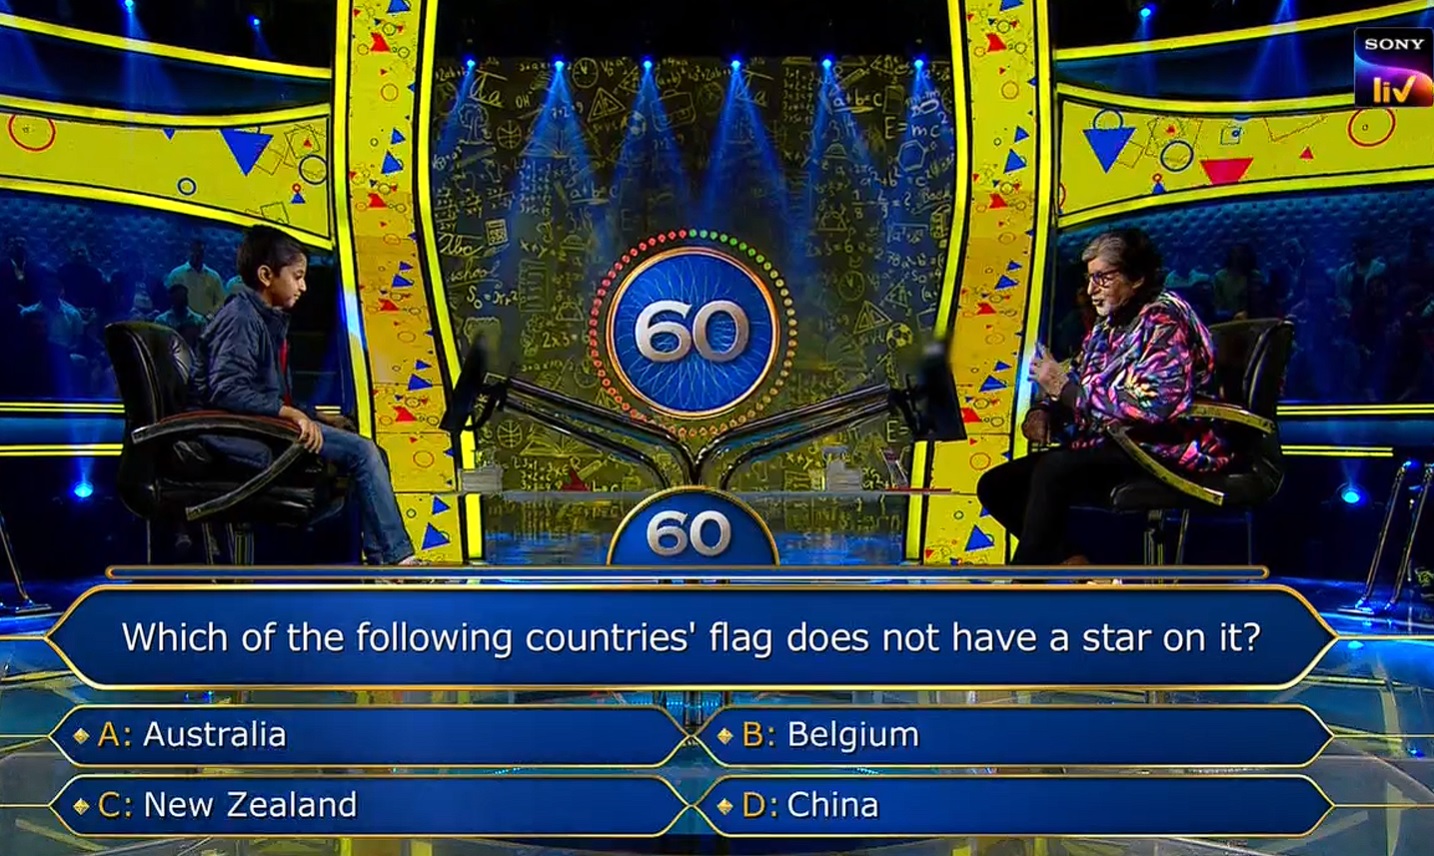 Ques : Which of the following countries’ flag does not have a star on it?